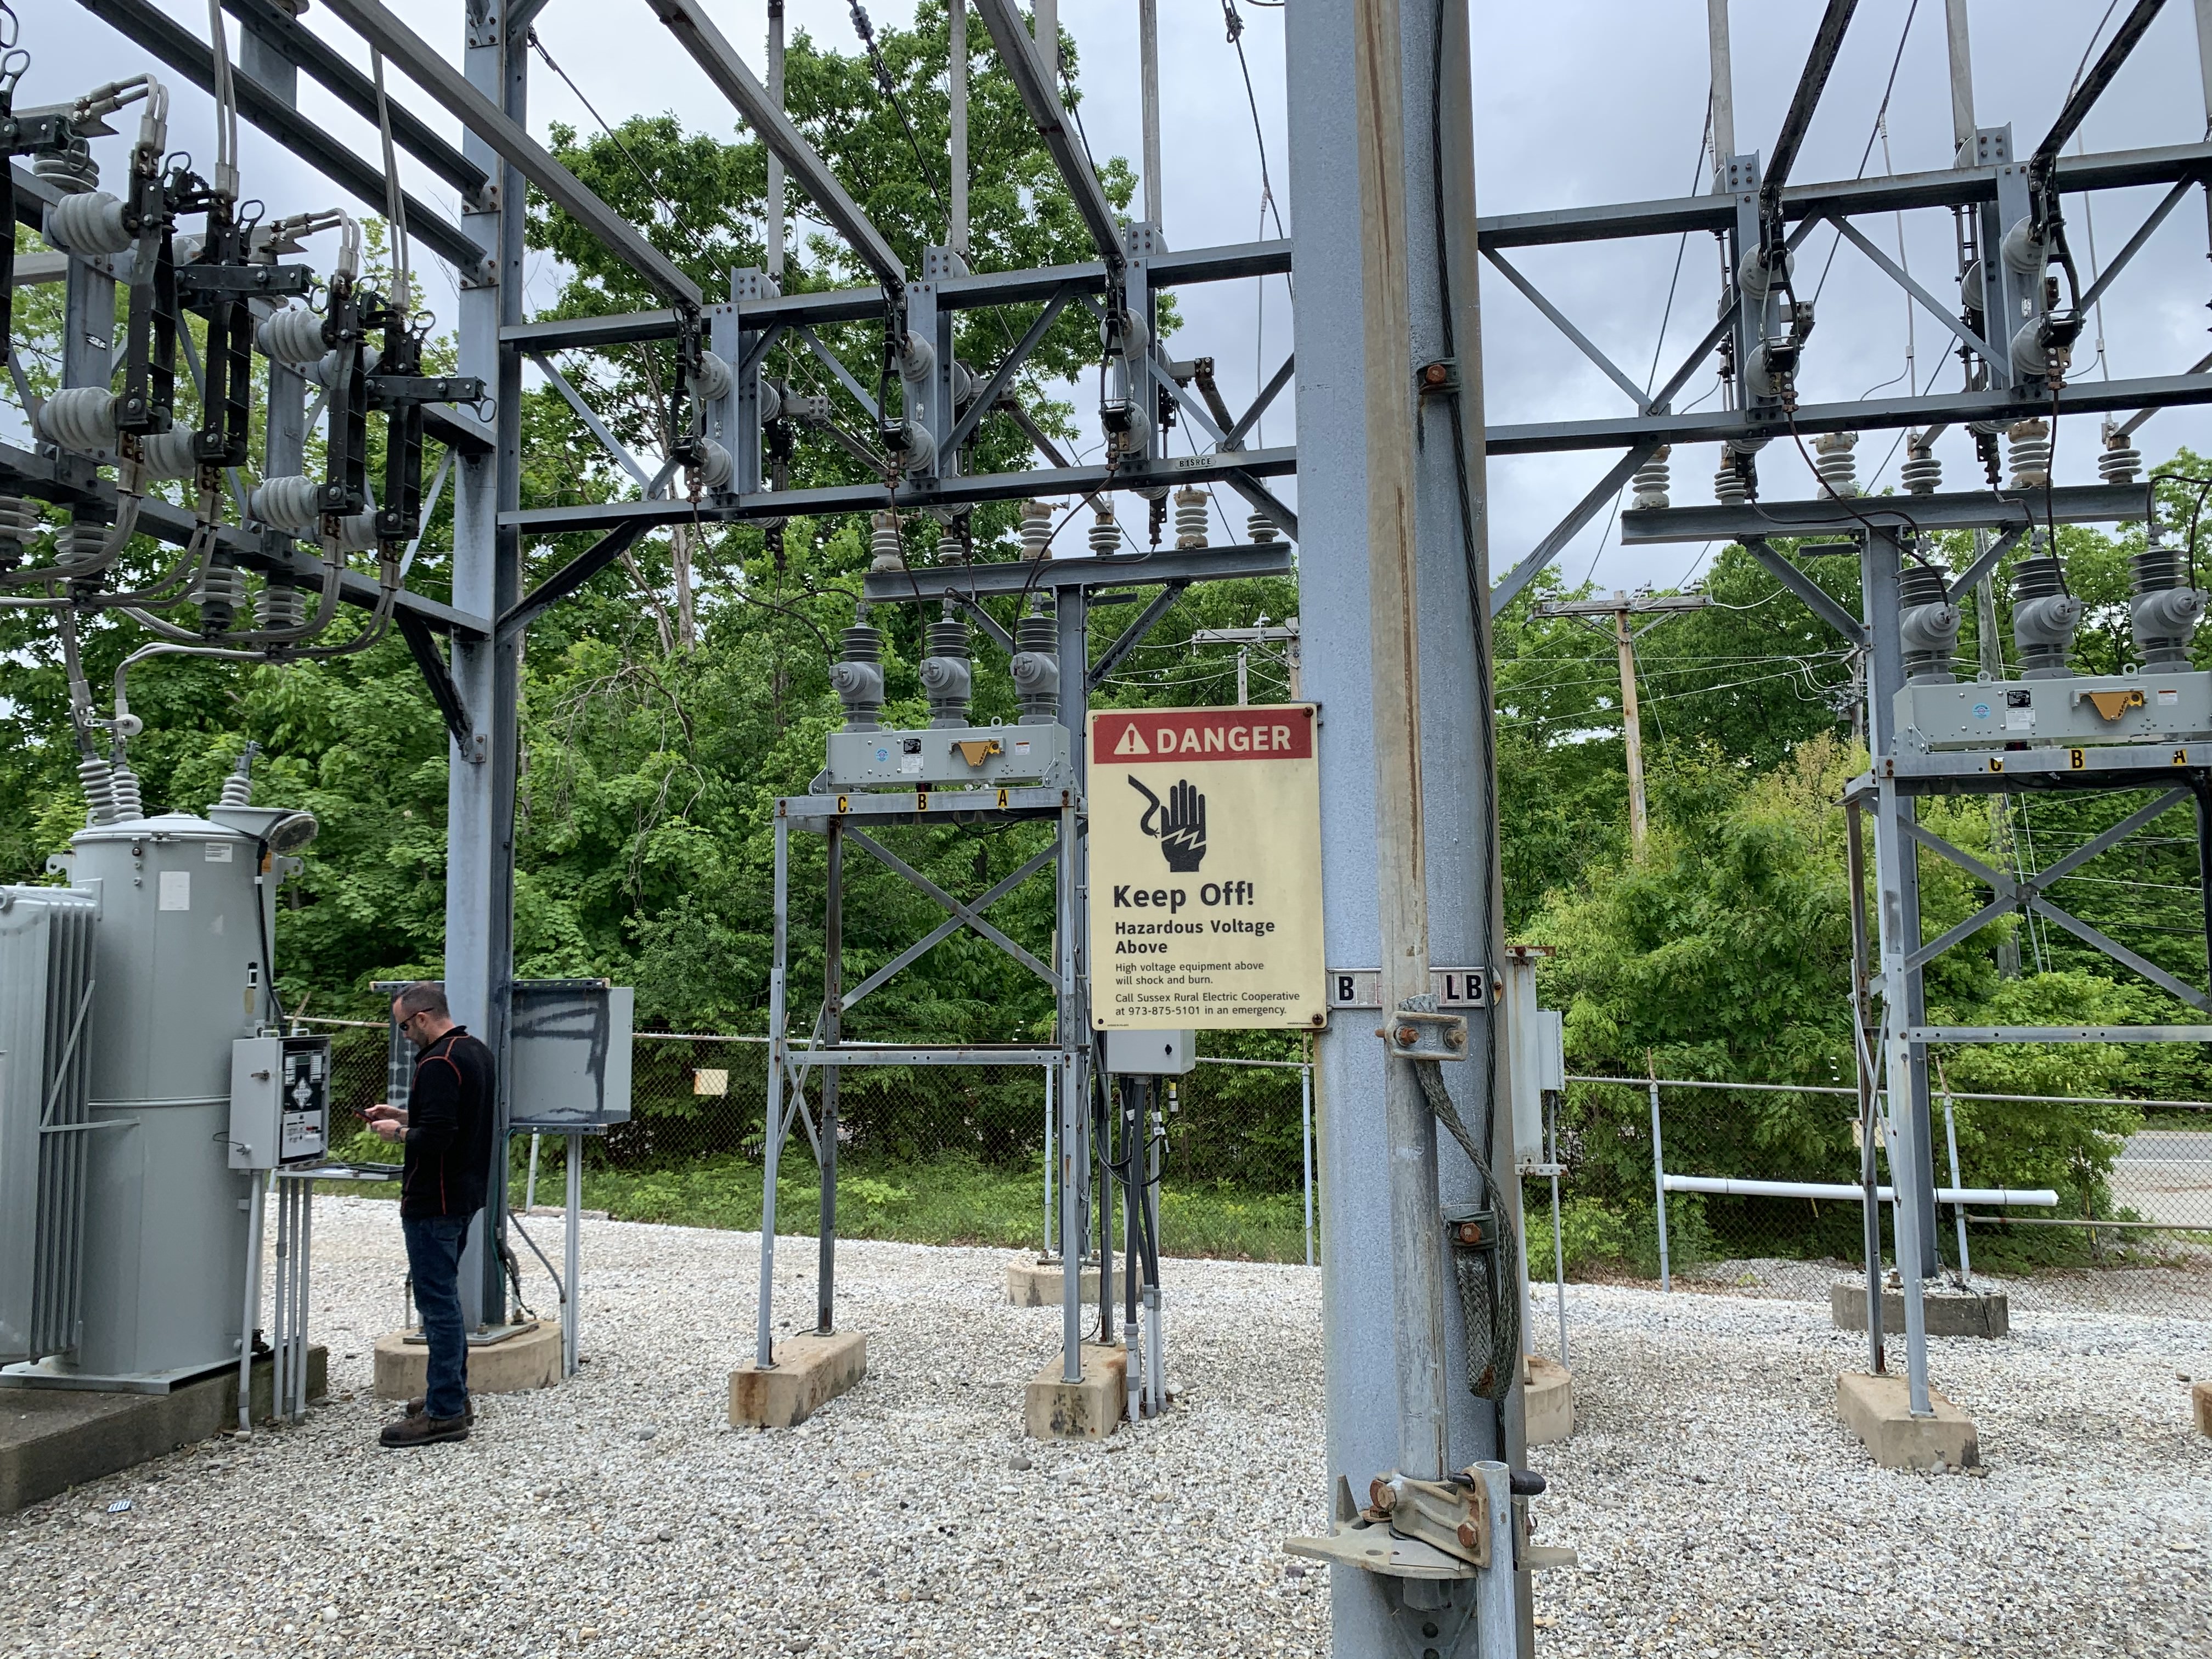 Photo of SREC engineer at substation, with a sign in the foreground that reads: "! DANGER - Keep Off! Hazardous Voltage Above. High voltage and equipment above will shock and burn. Call Sussex Rural Electric Cooperative at 973-875-5101 in an emergency."